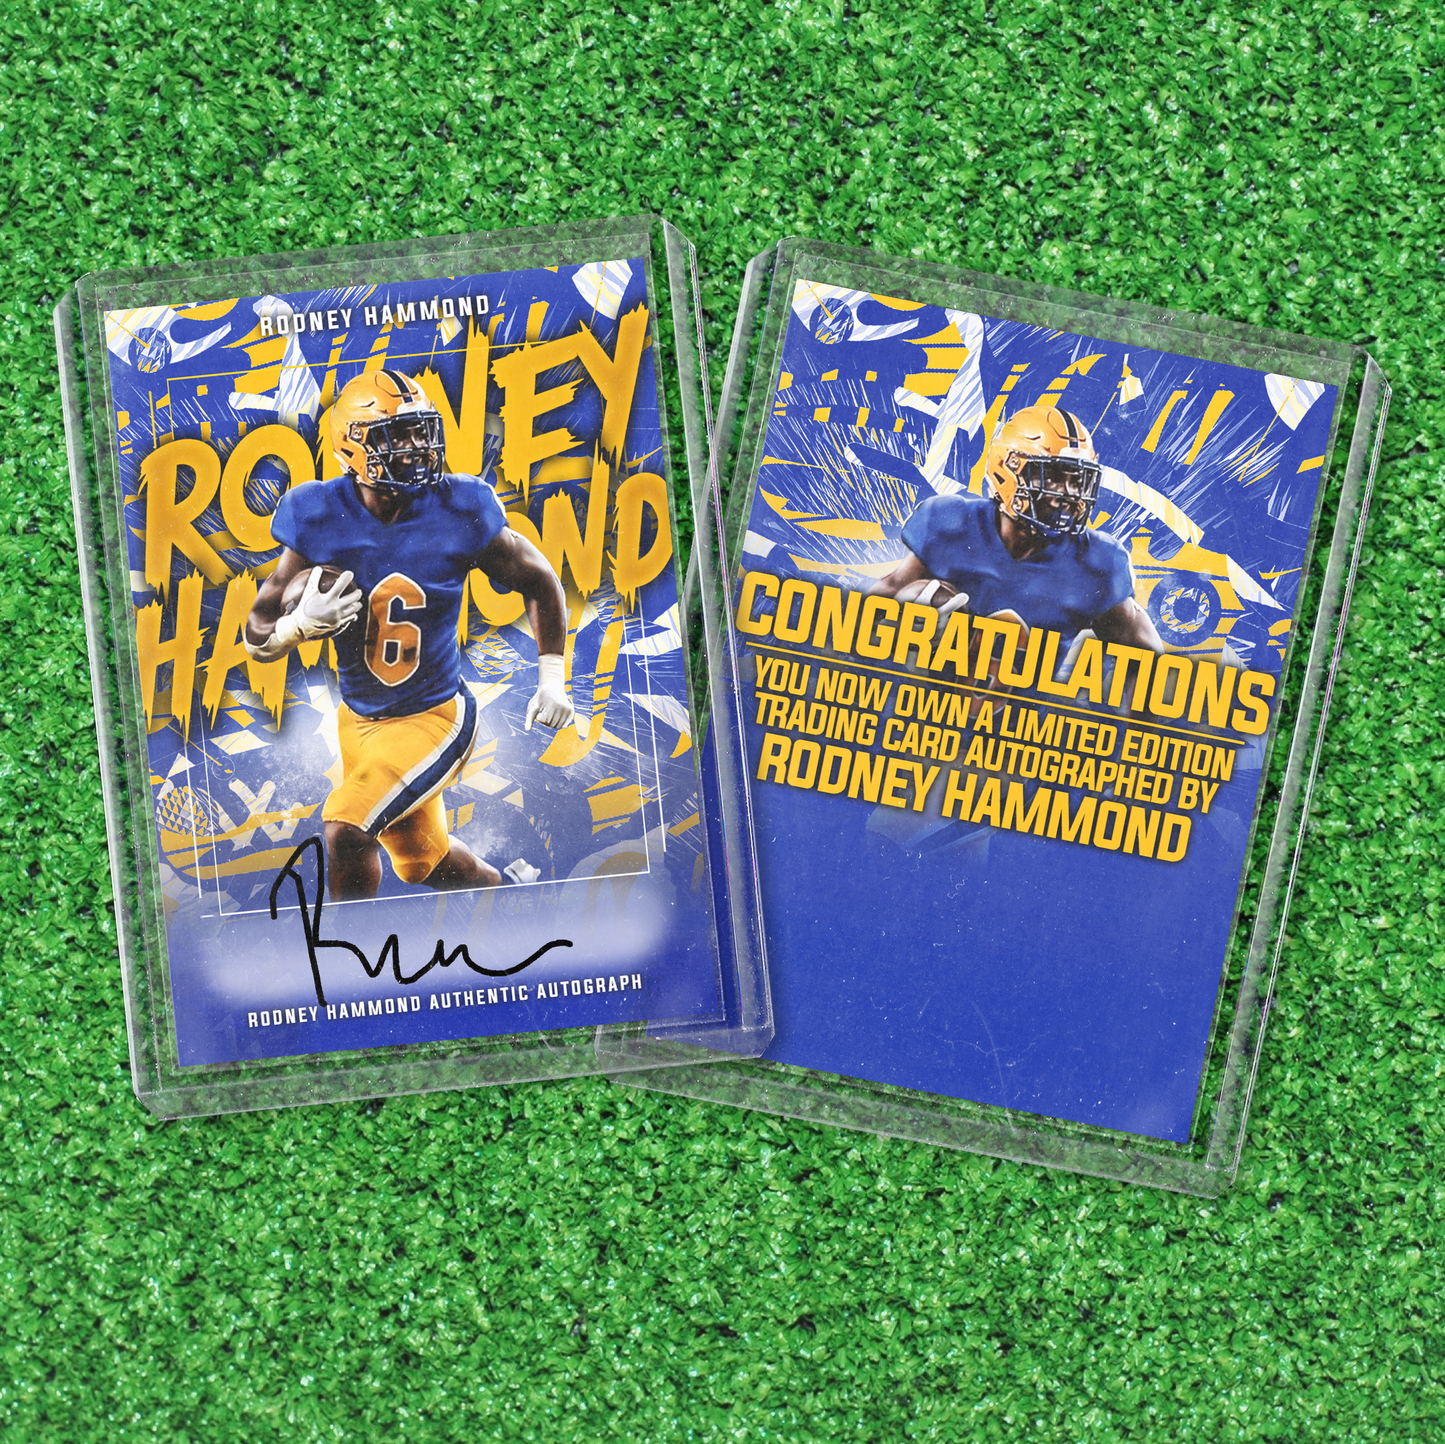 Rodney Hammond - Autographed Card - LIMITED TIME RUN